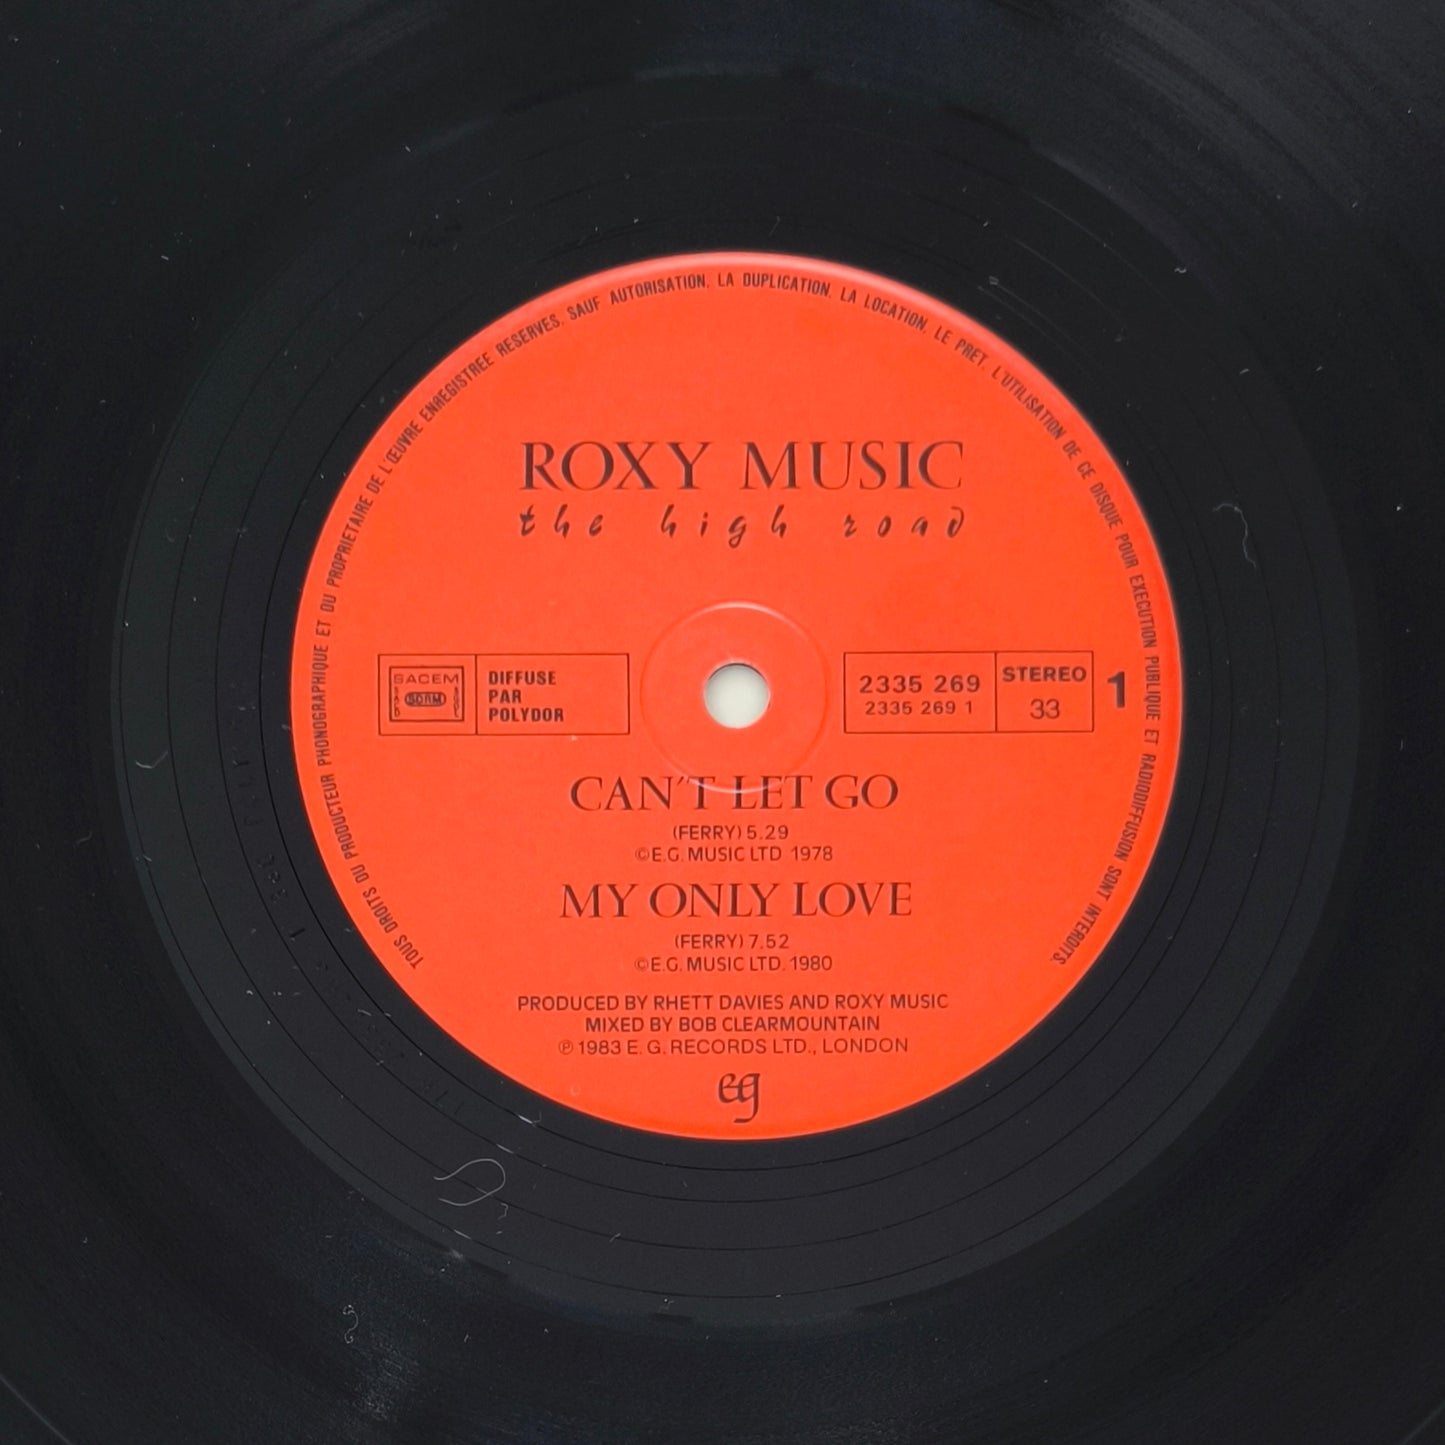 ROXY MUSIC - Musique Roxy - The High Road